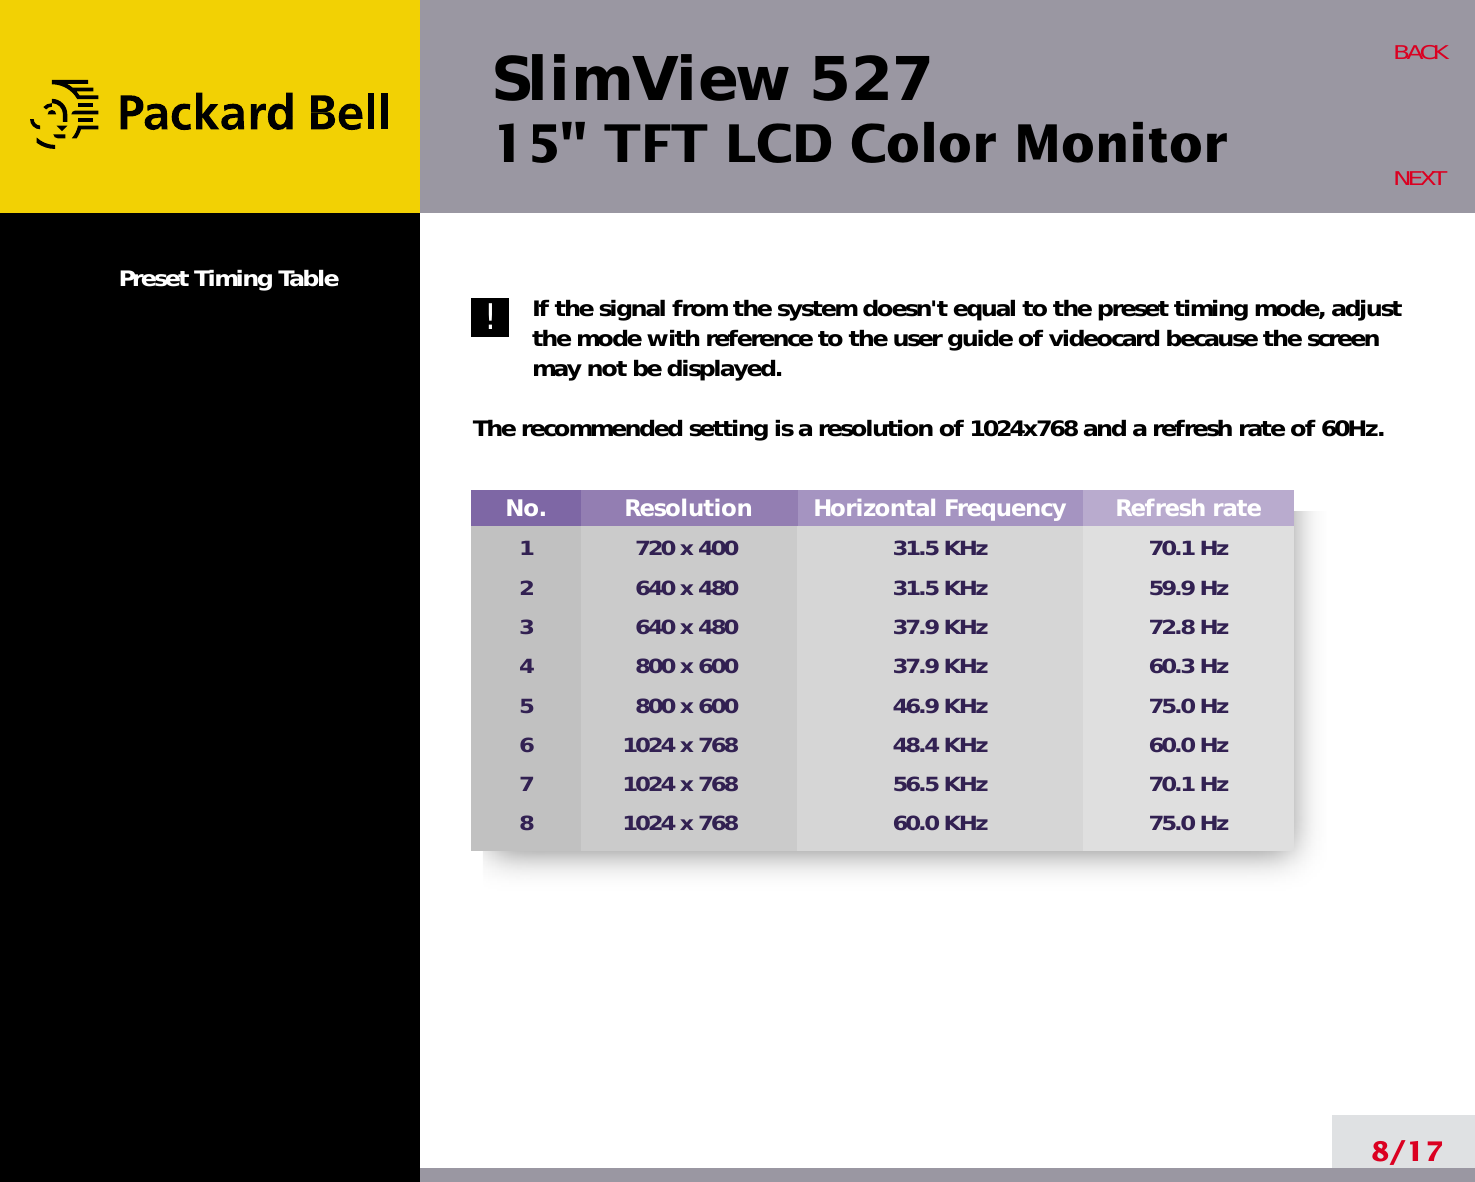 SlimView 52715&quot; TFT LCD Color MonitorNo.12345678Resolution720 x 400640 x 480640 x 480800 x 600800 x 6001024 x 7681024 x 7681024 x 768Horizontal Frequency31.5 KHz31.5 KHz37.9 KHz37.9 KHz46.9 KHz48.4 KHz56.5 KHz60.0 KHzRefresh rate70.1 Hz59.9 Hz72.8 Hz60.3 Hz75.0 Hz60.0 Hz70.1 Hz75.0 HzPreset Timing Table If the signal from the system doesn&apos;t equal to the preset timing mode, adjustthe mode with reference to the user guide of videocard because the screenmay not be displayed.The recommended setting is a resolution of 1024x768 and a refresh rate of 60Hz.8/17BACKNEXT!